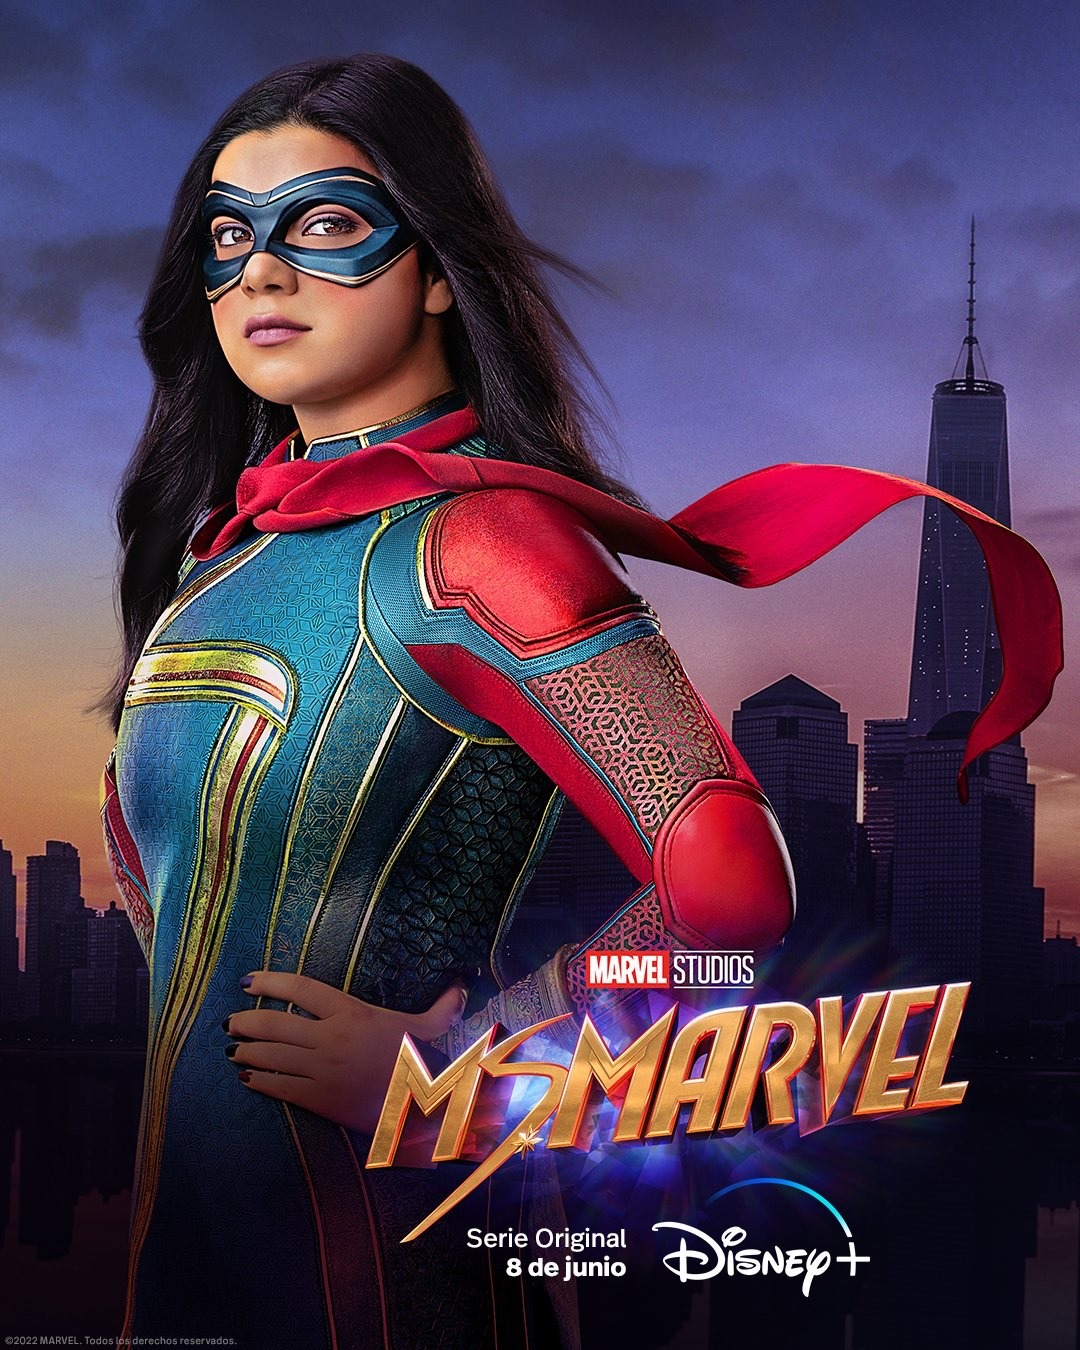 Ms Marvel | Promotional Poster